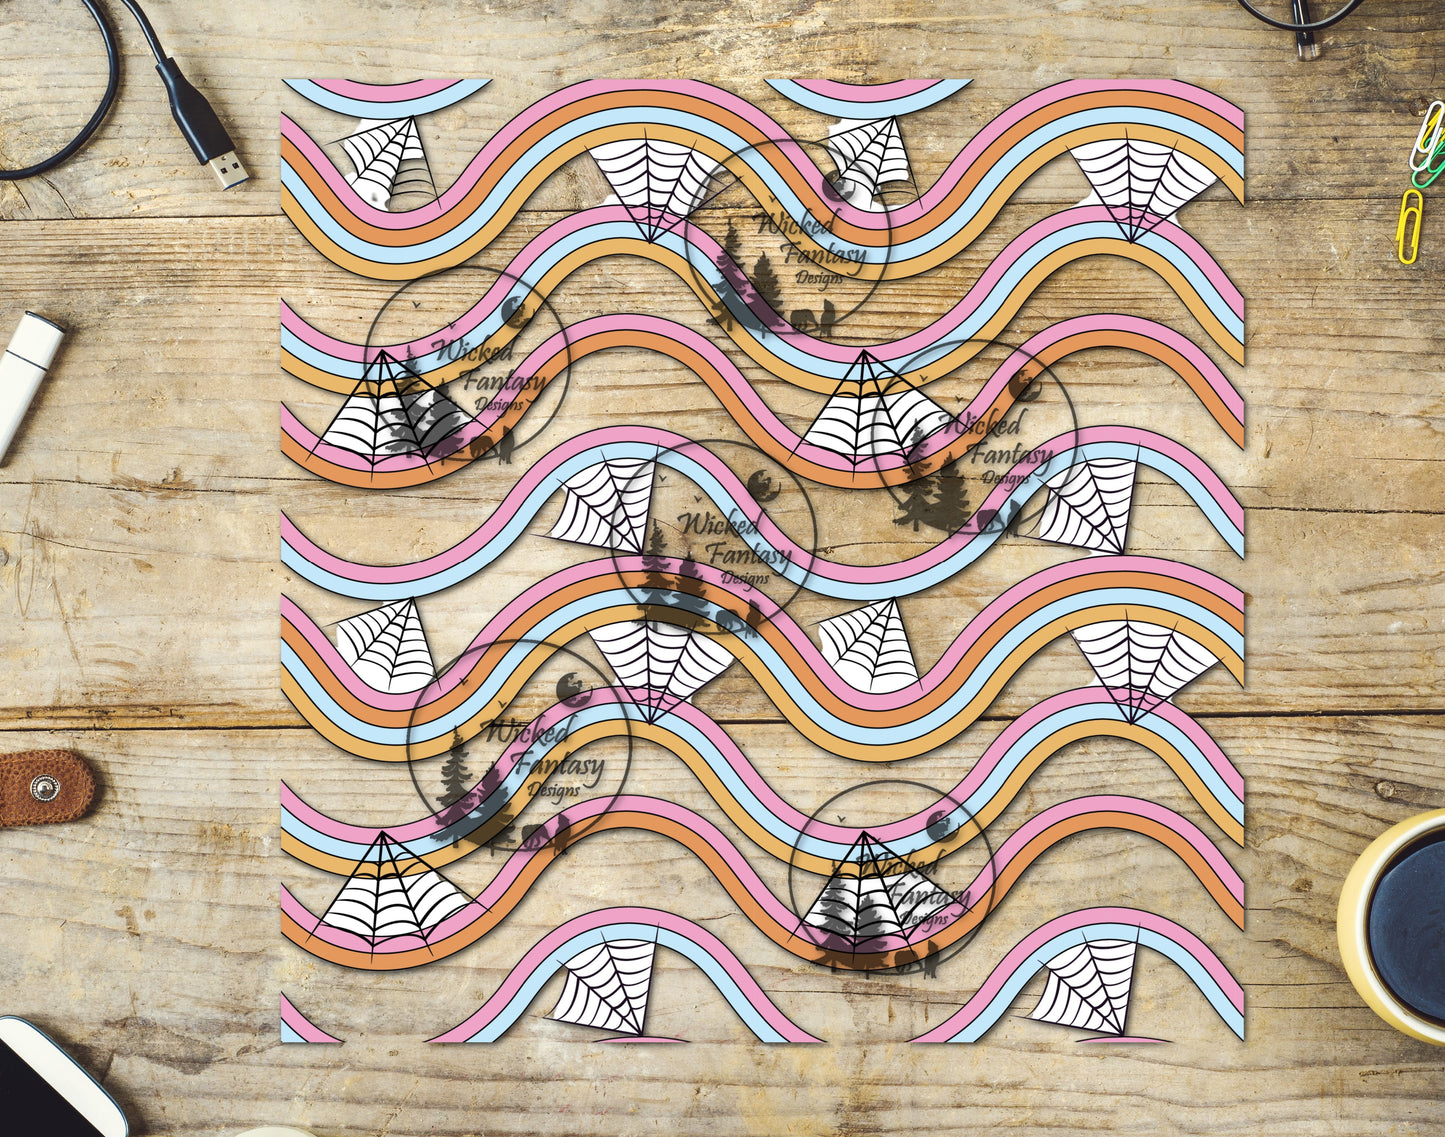 UVDTF Decal Sheet Retro Pastel Waves 'n Spider Web Elements